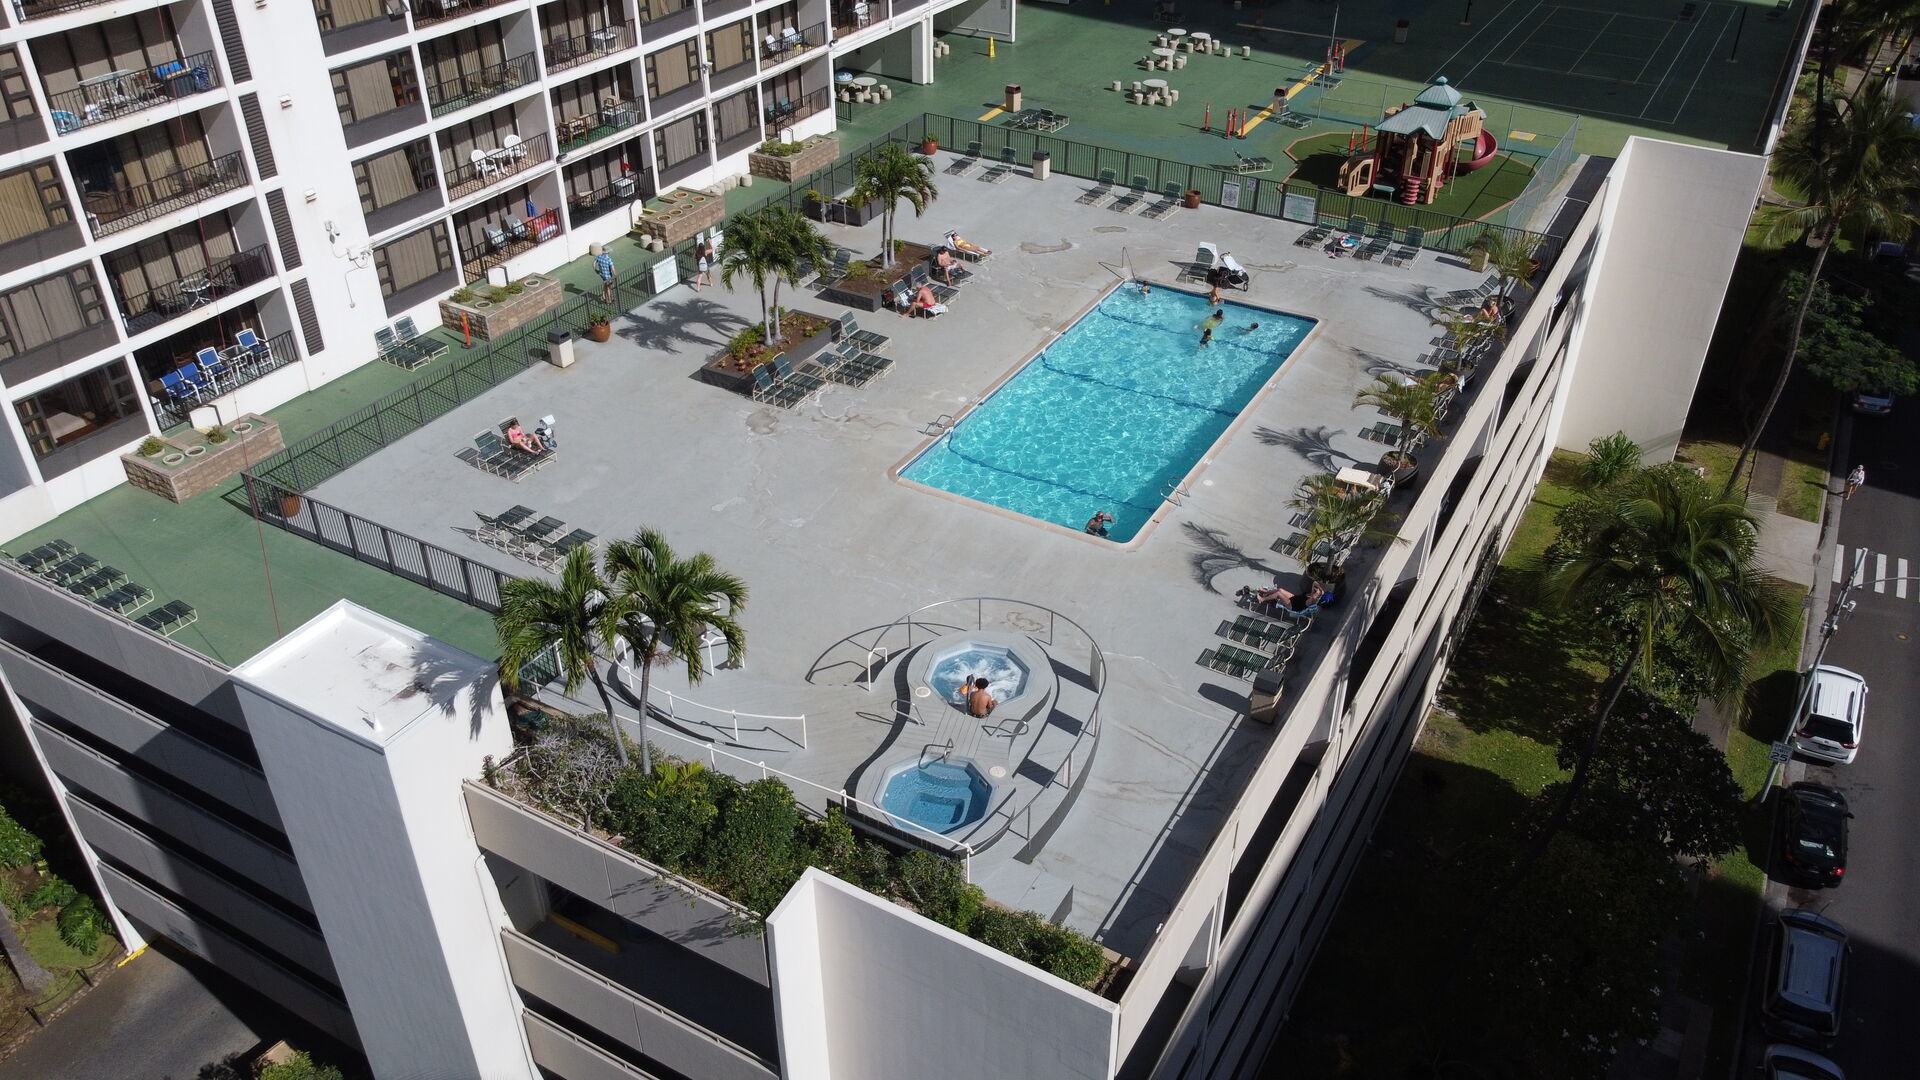 6th floor recreation deck, complete with pool, hot tub, sun deck, BBQ area, and playground